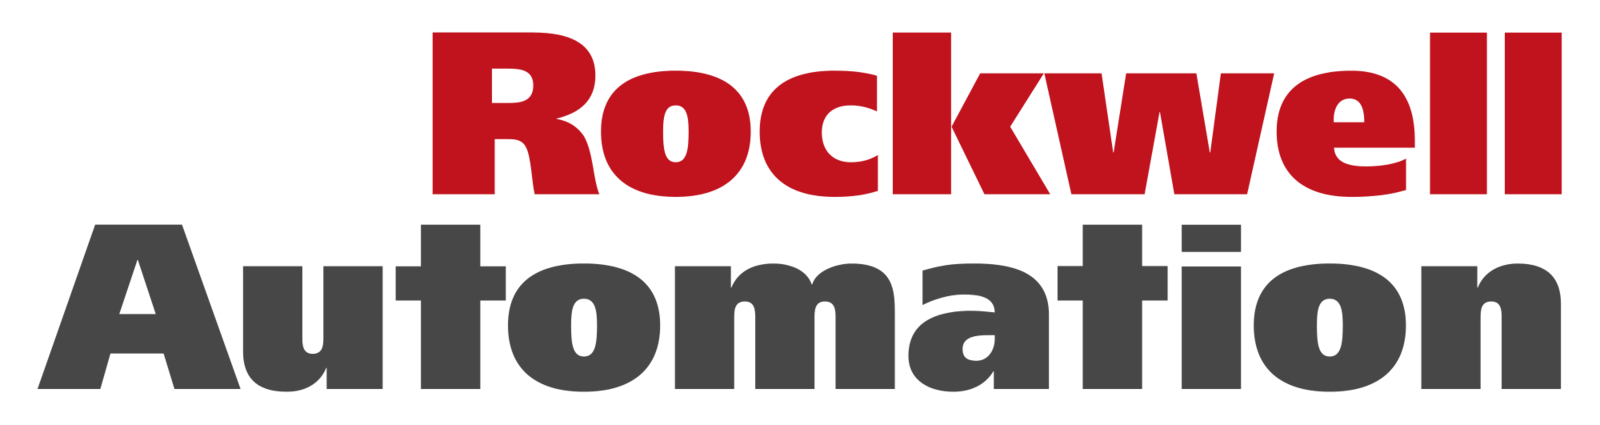 Rockwell_Automation_logo.svg.png